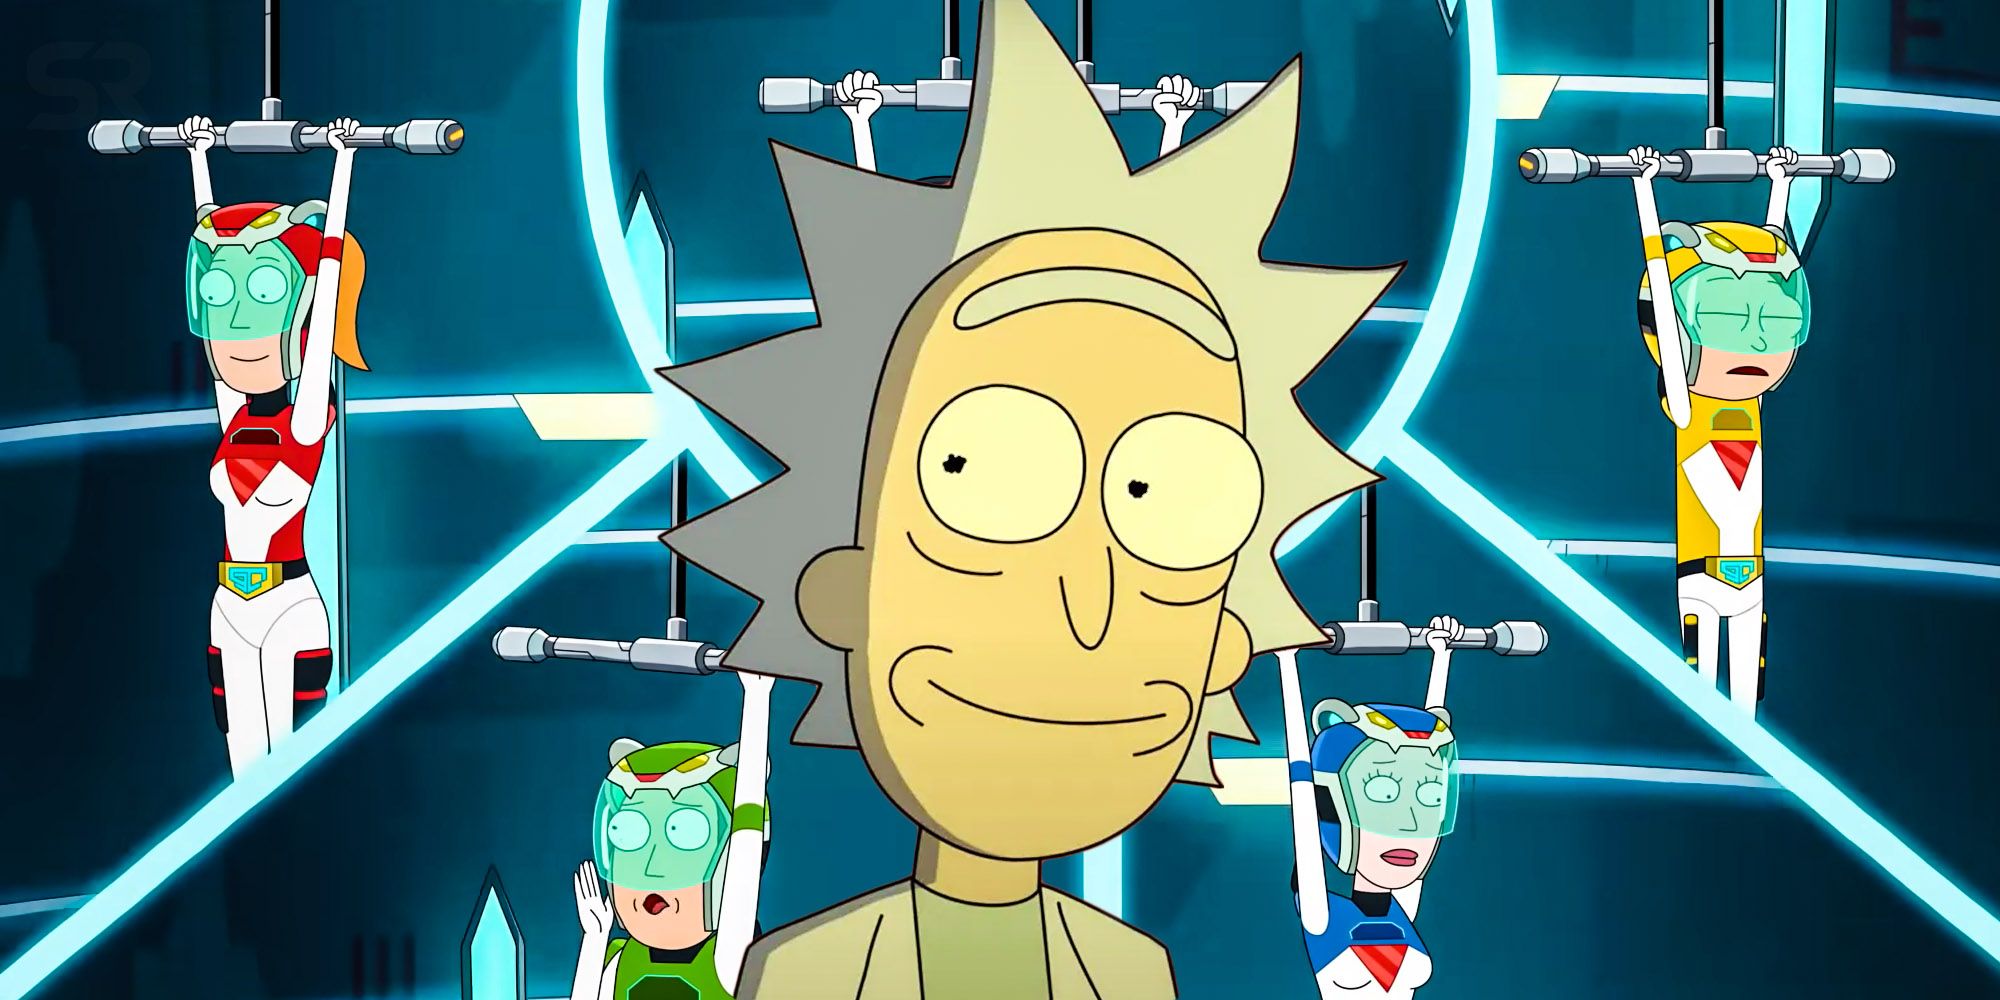 Rick and morty season 5 cast and character guide